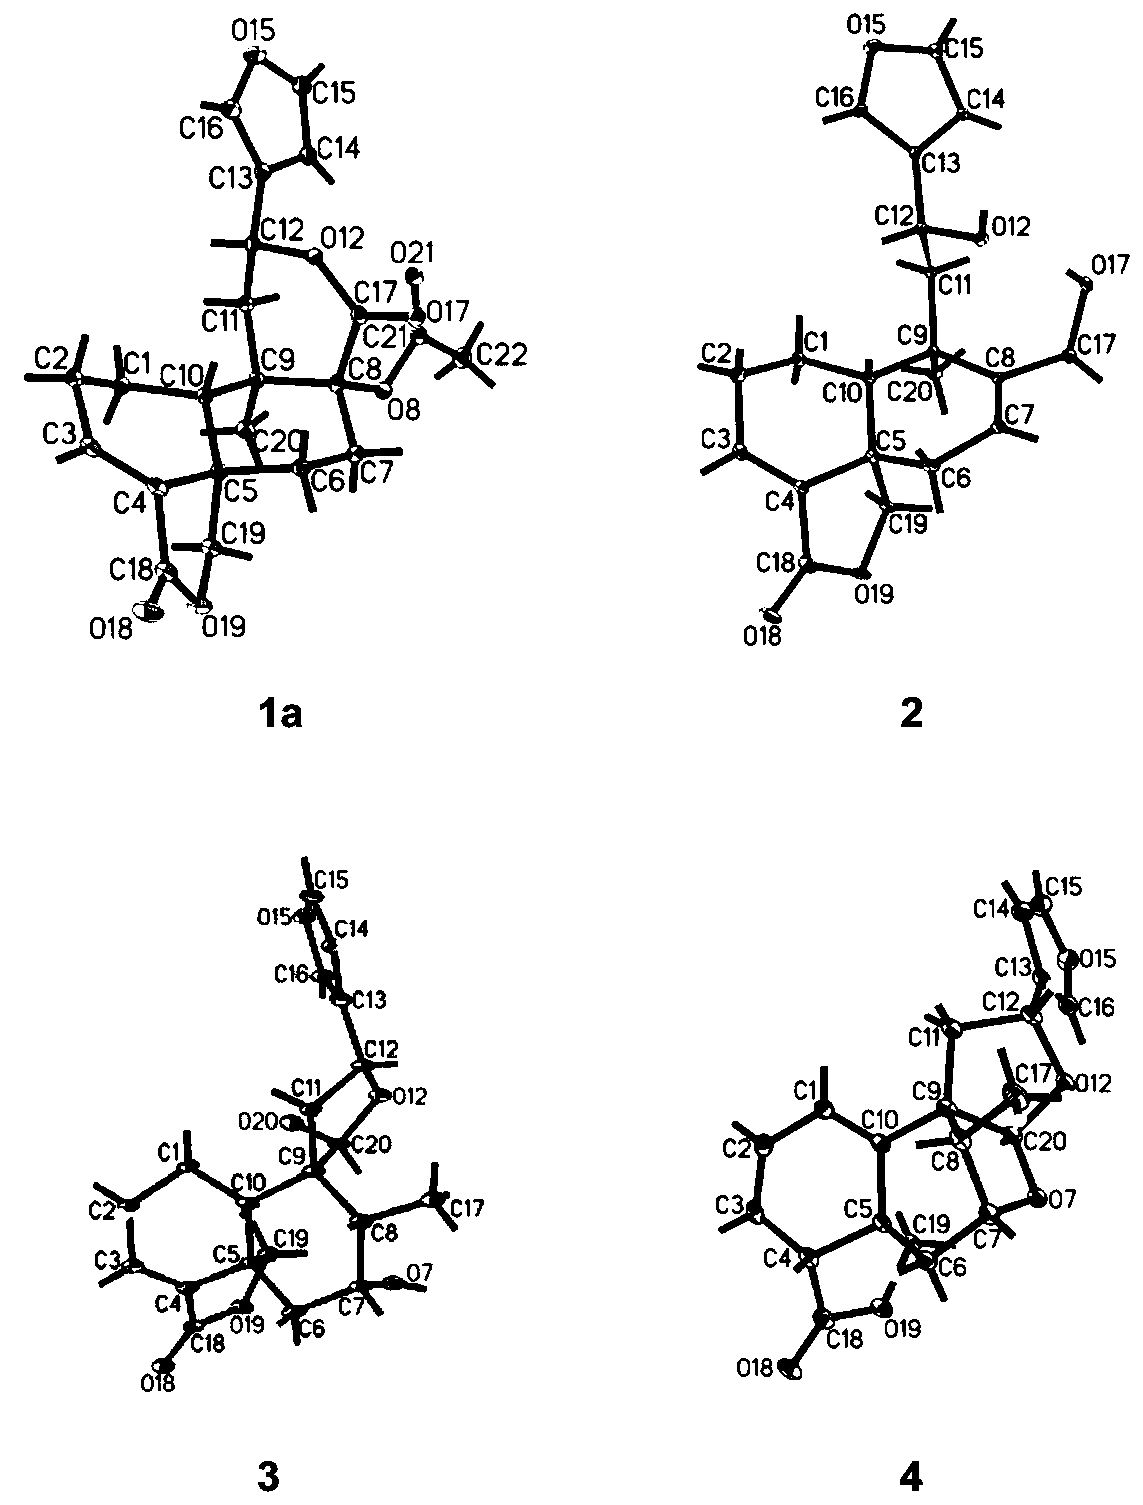 Clerodane diterpenoid compounds and application thereof in pharmacy